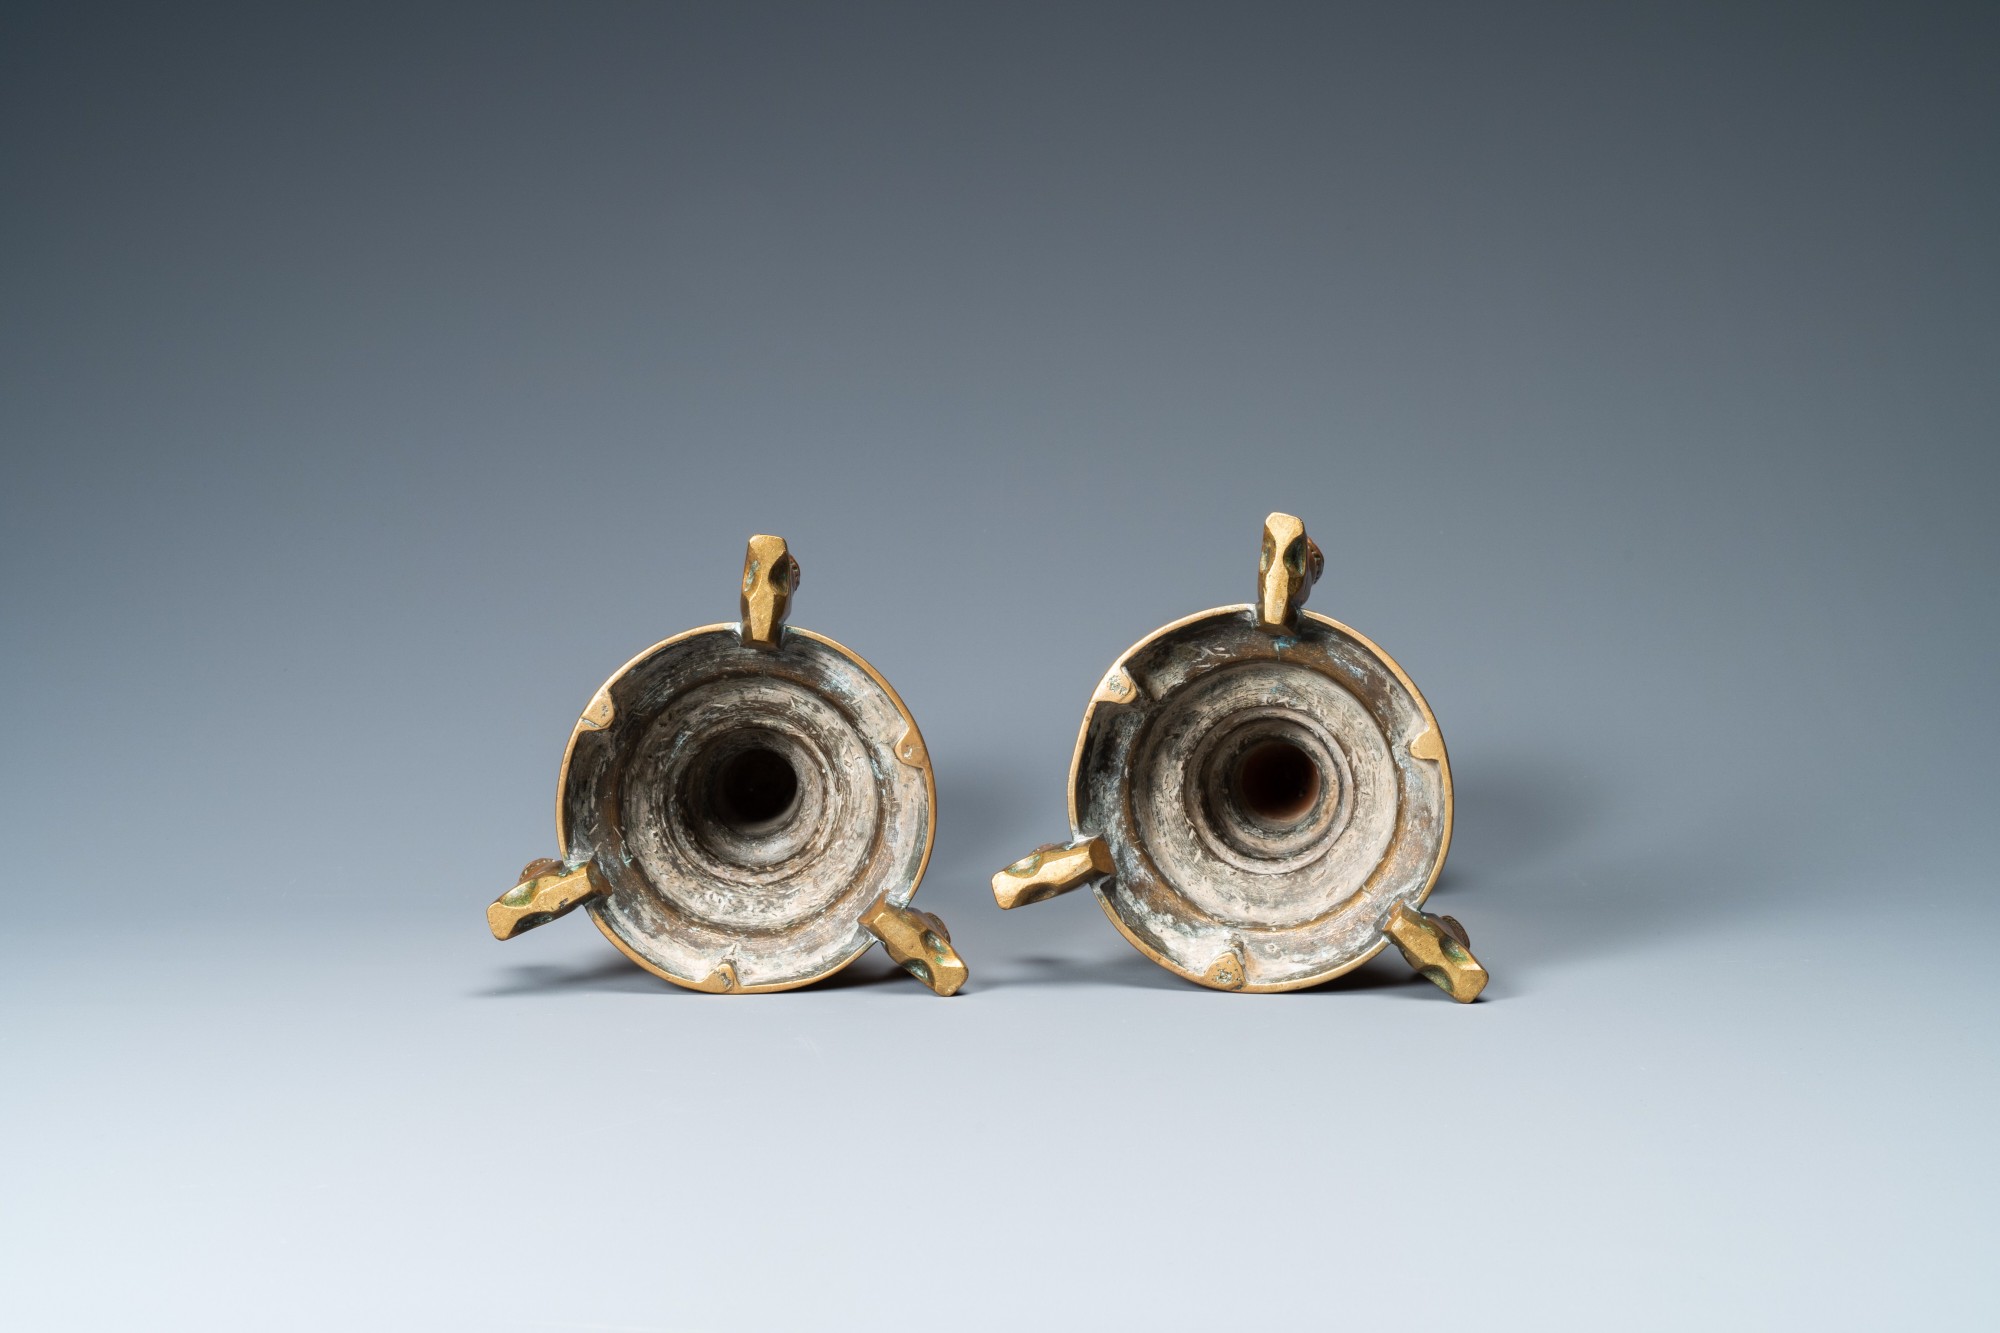 A Pair of Pricket Candlesticks, The Netherlands, first half 15th century 